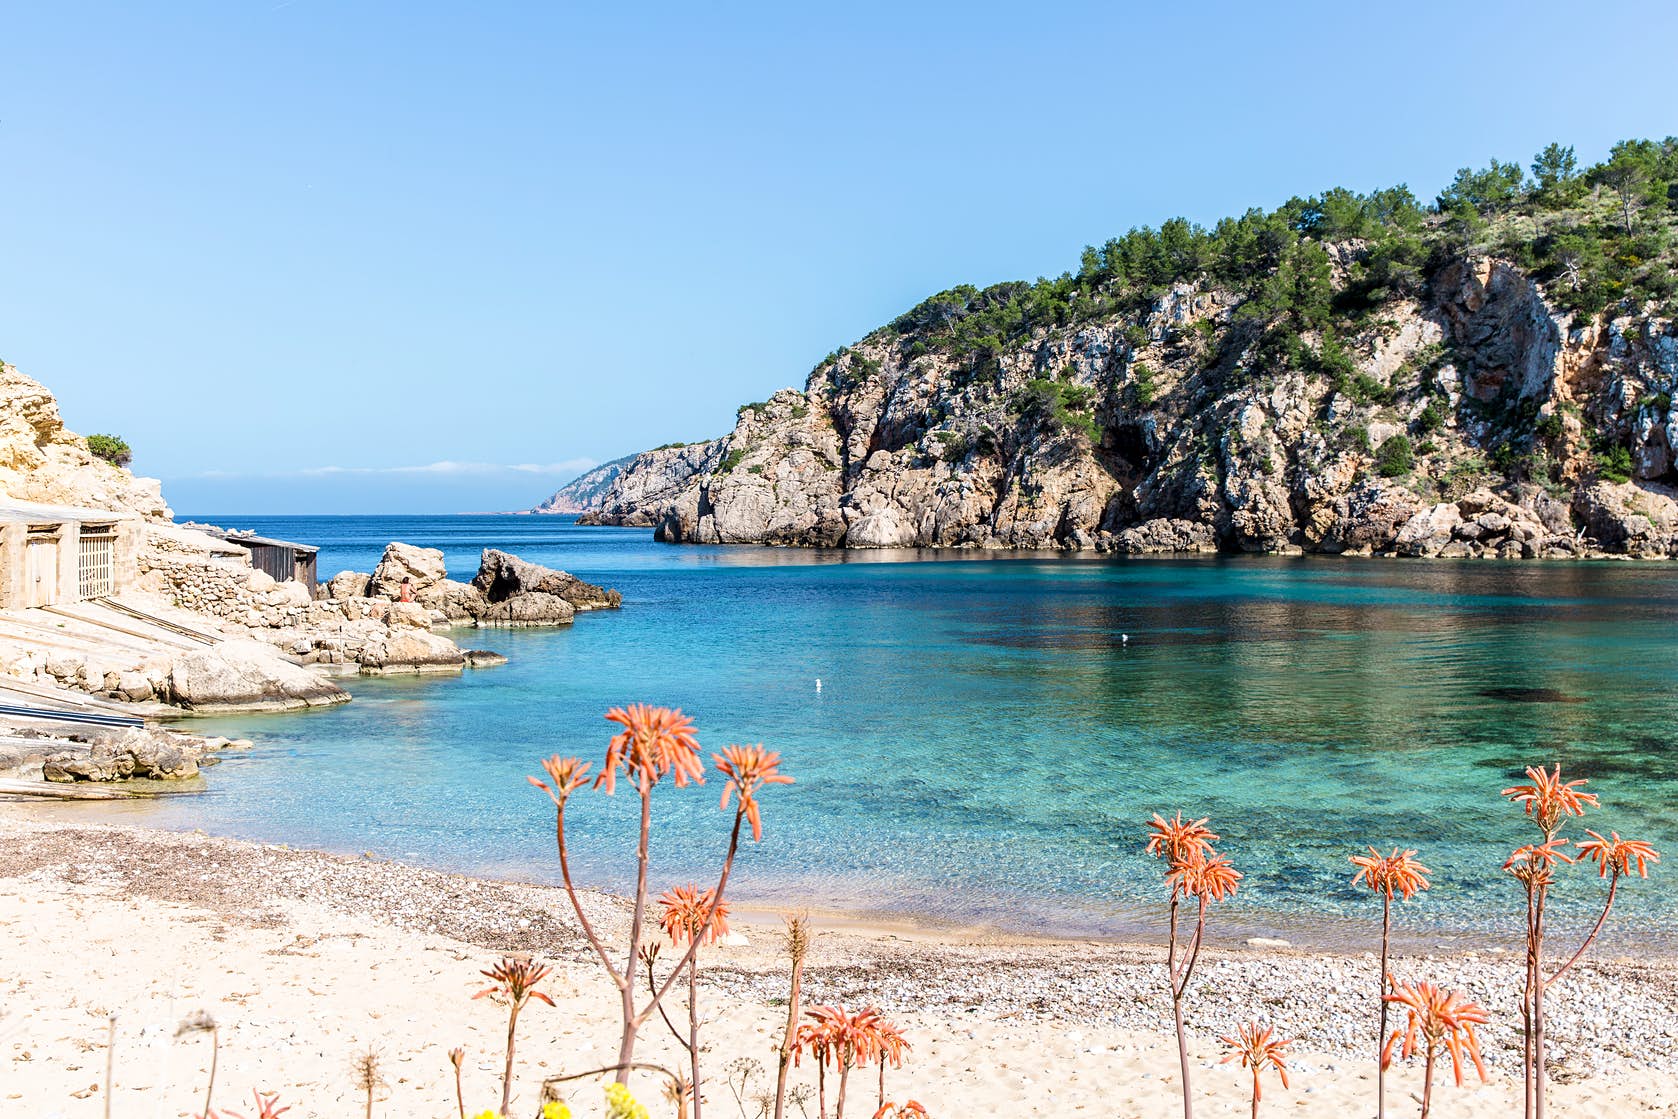 IBIZA embraces its softer side this summer without superclubs and dance parties (Spagna)